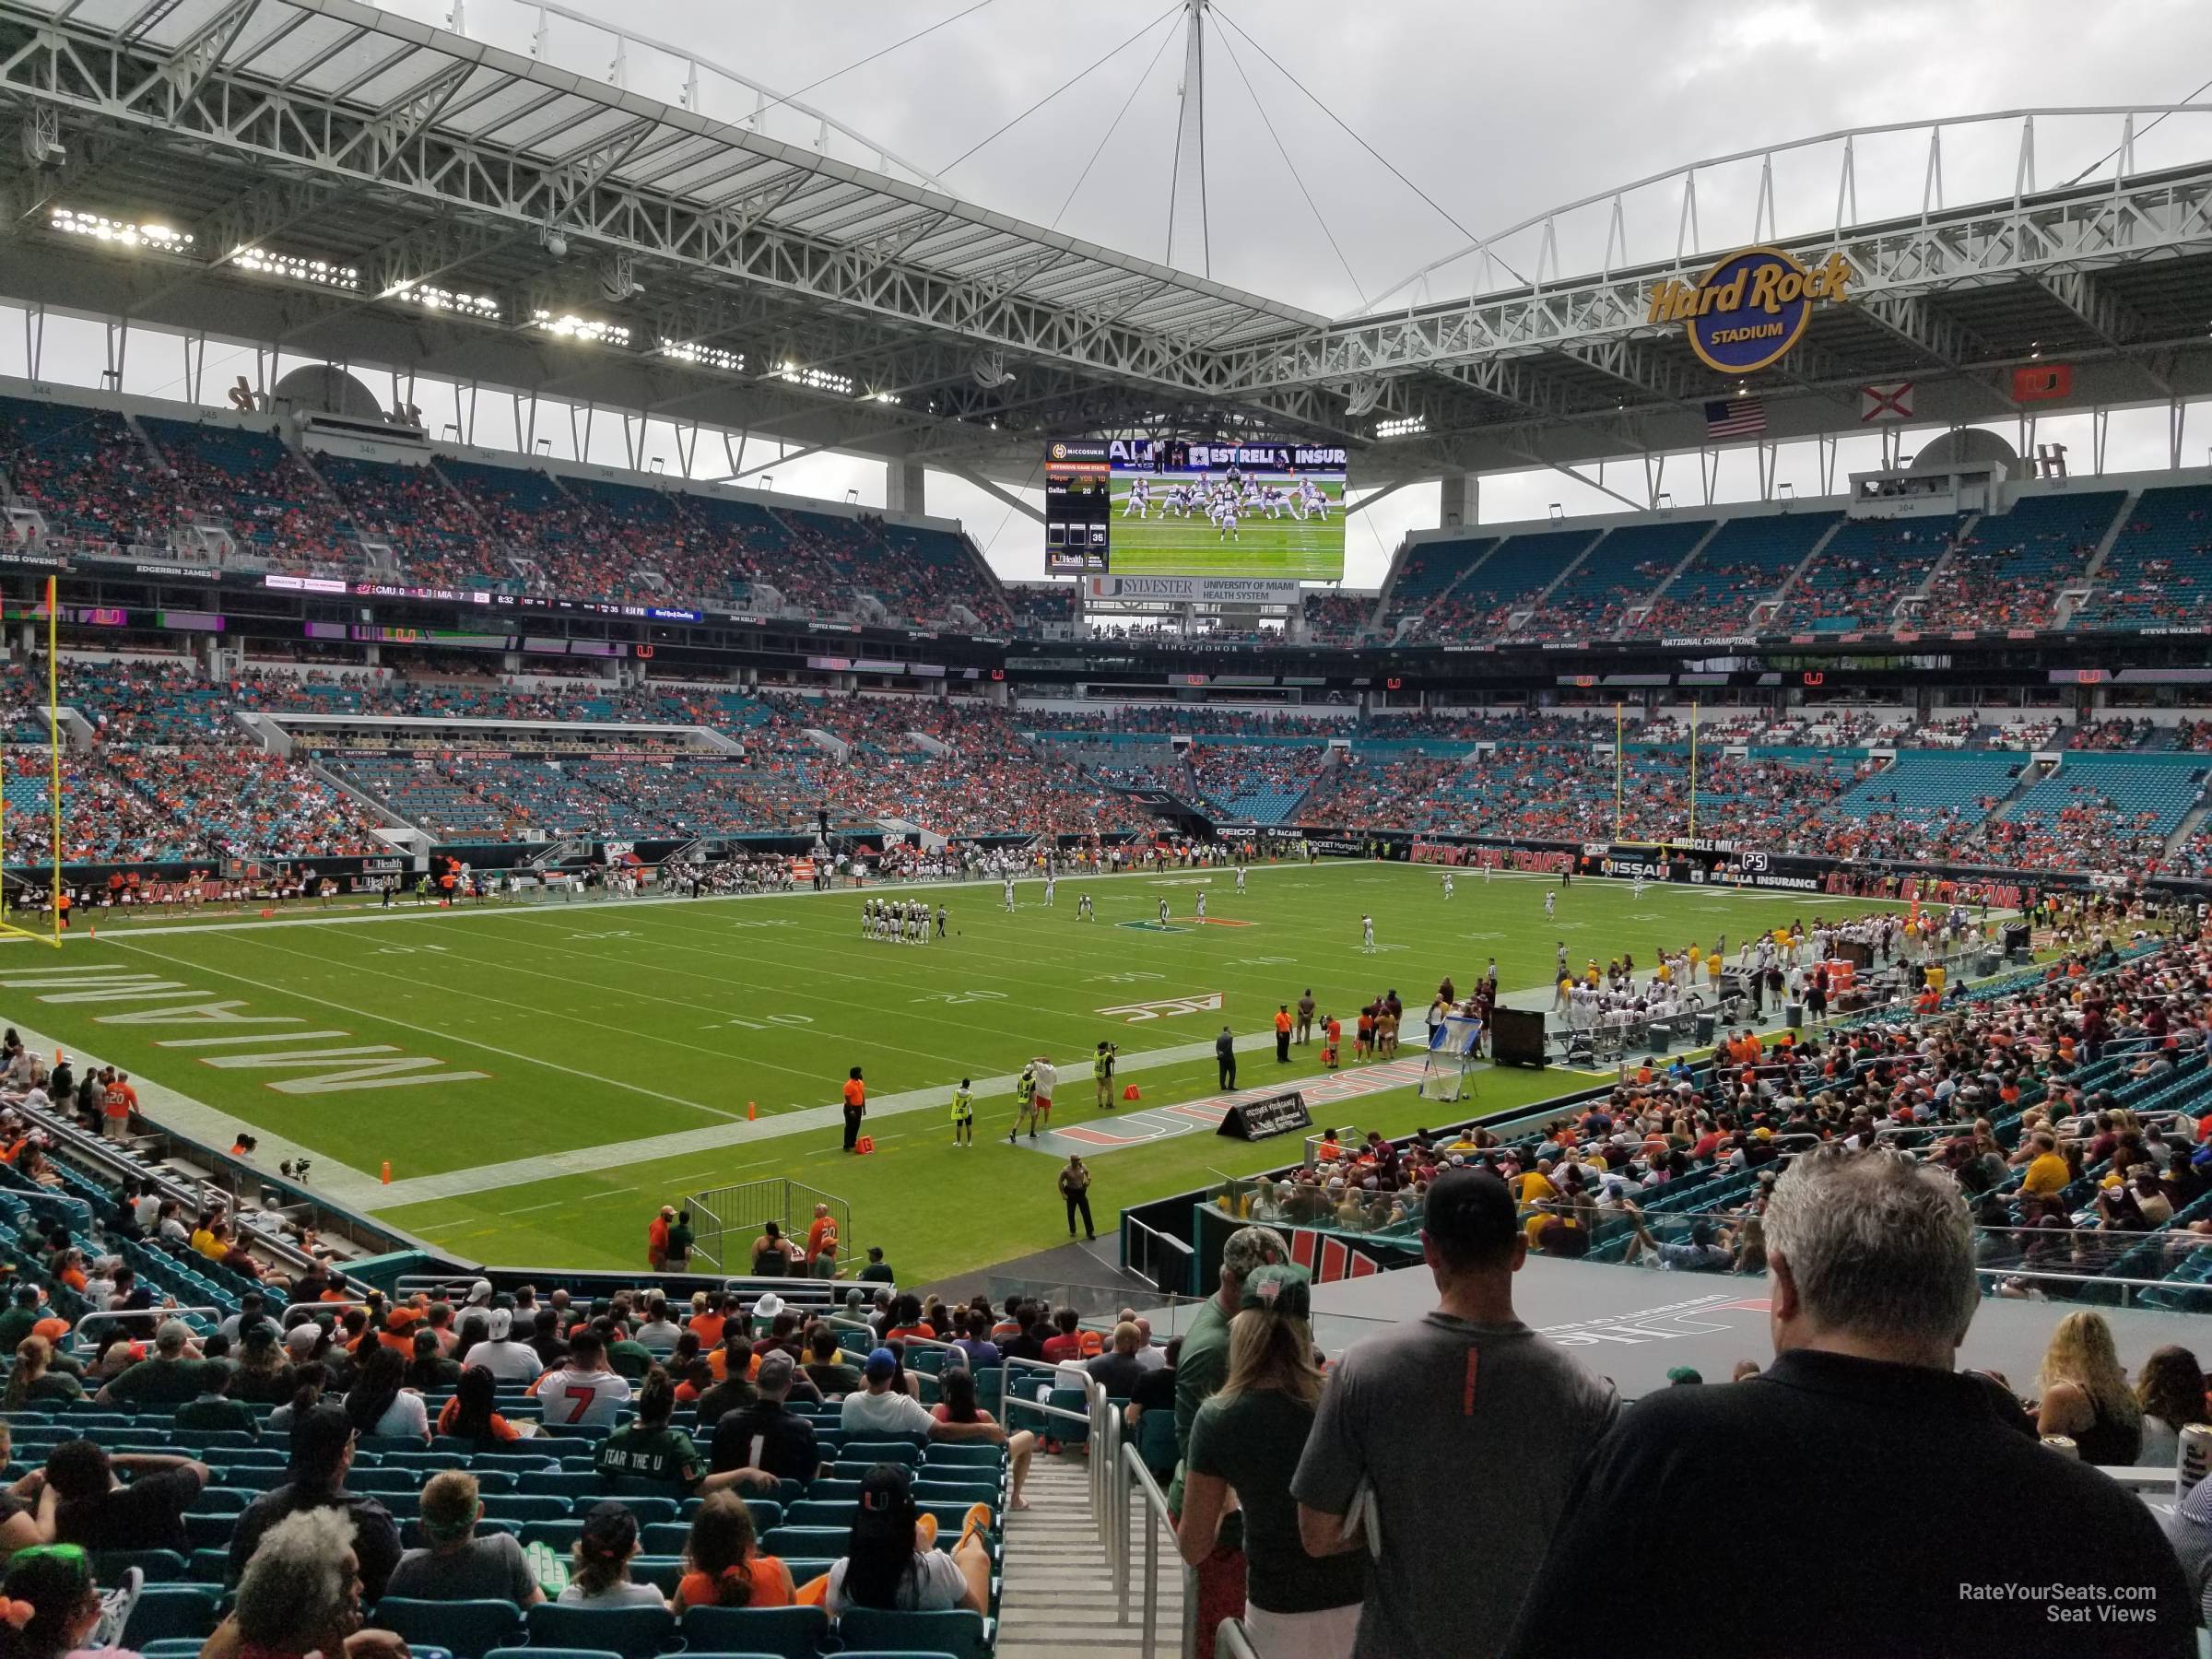 section 125, row 26 seat view  for football - hard rock stadium